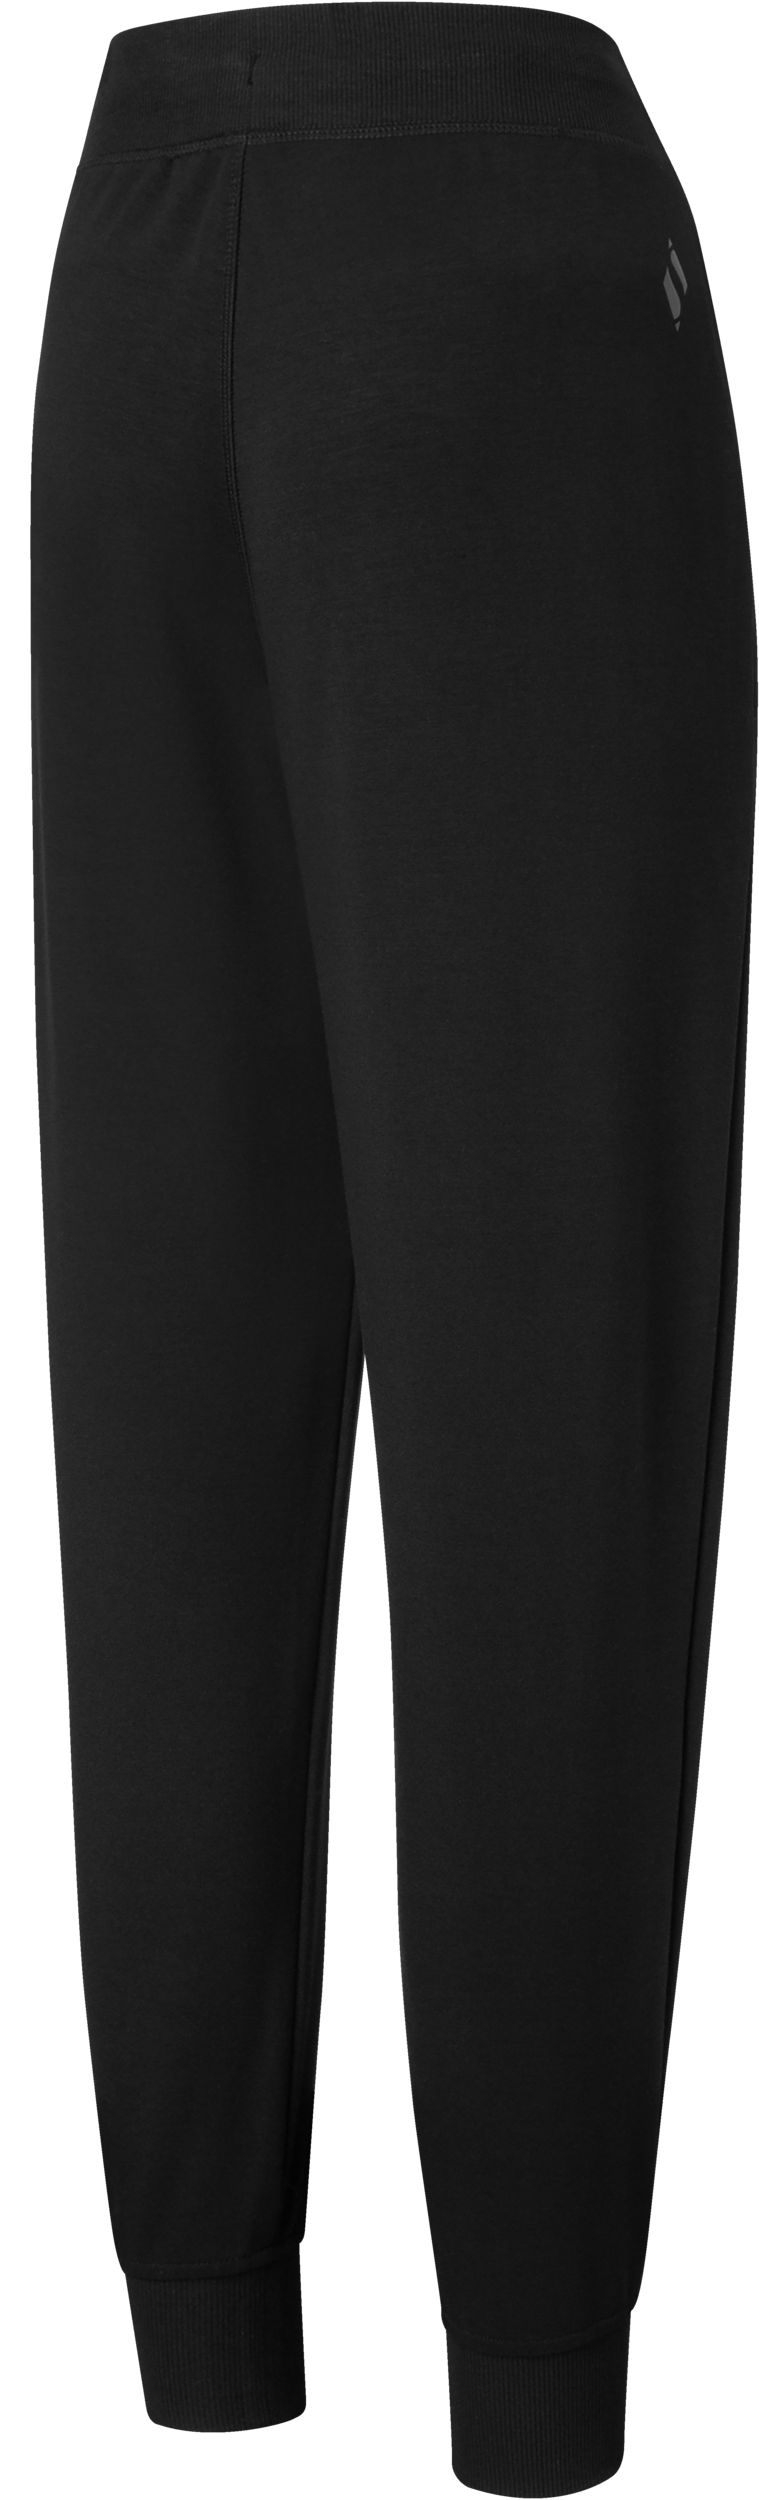 Skechers Women's Restful Joggers, Sweatpants, Casual, Lounge, Training,  Tapered